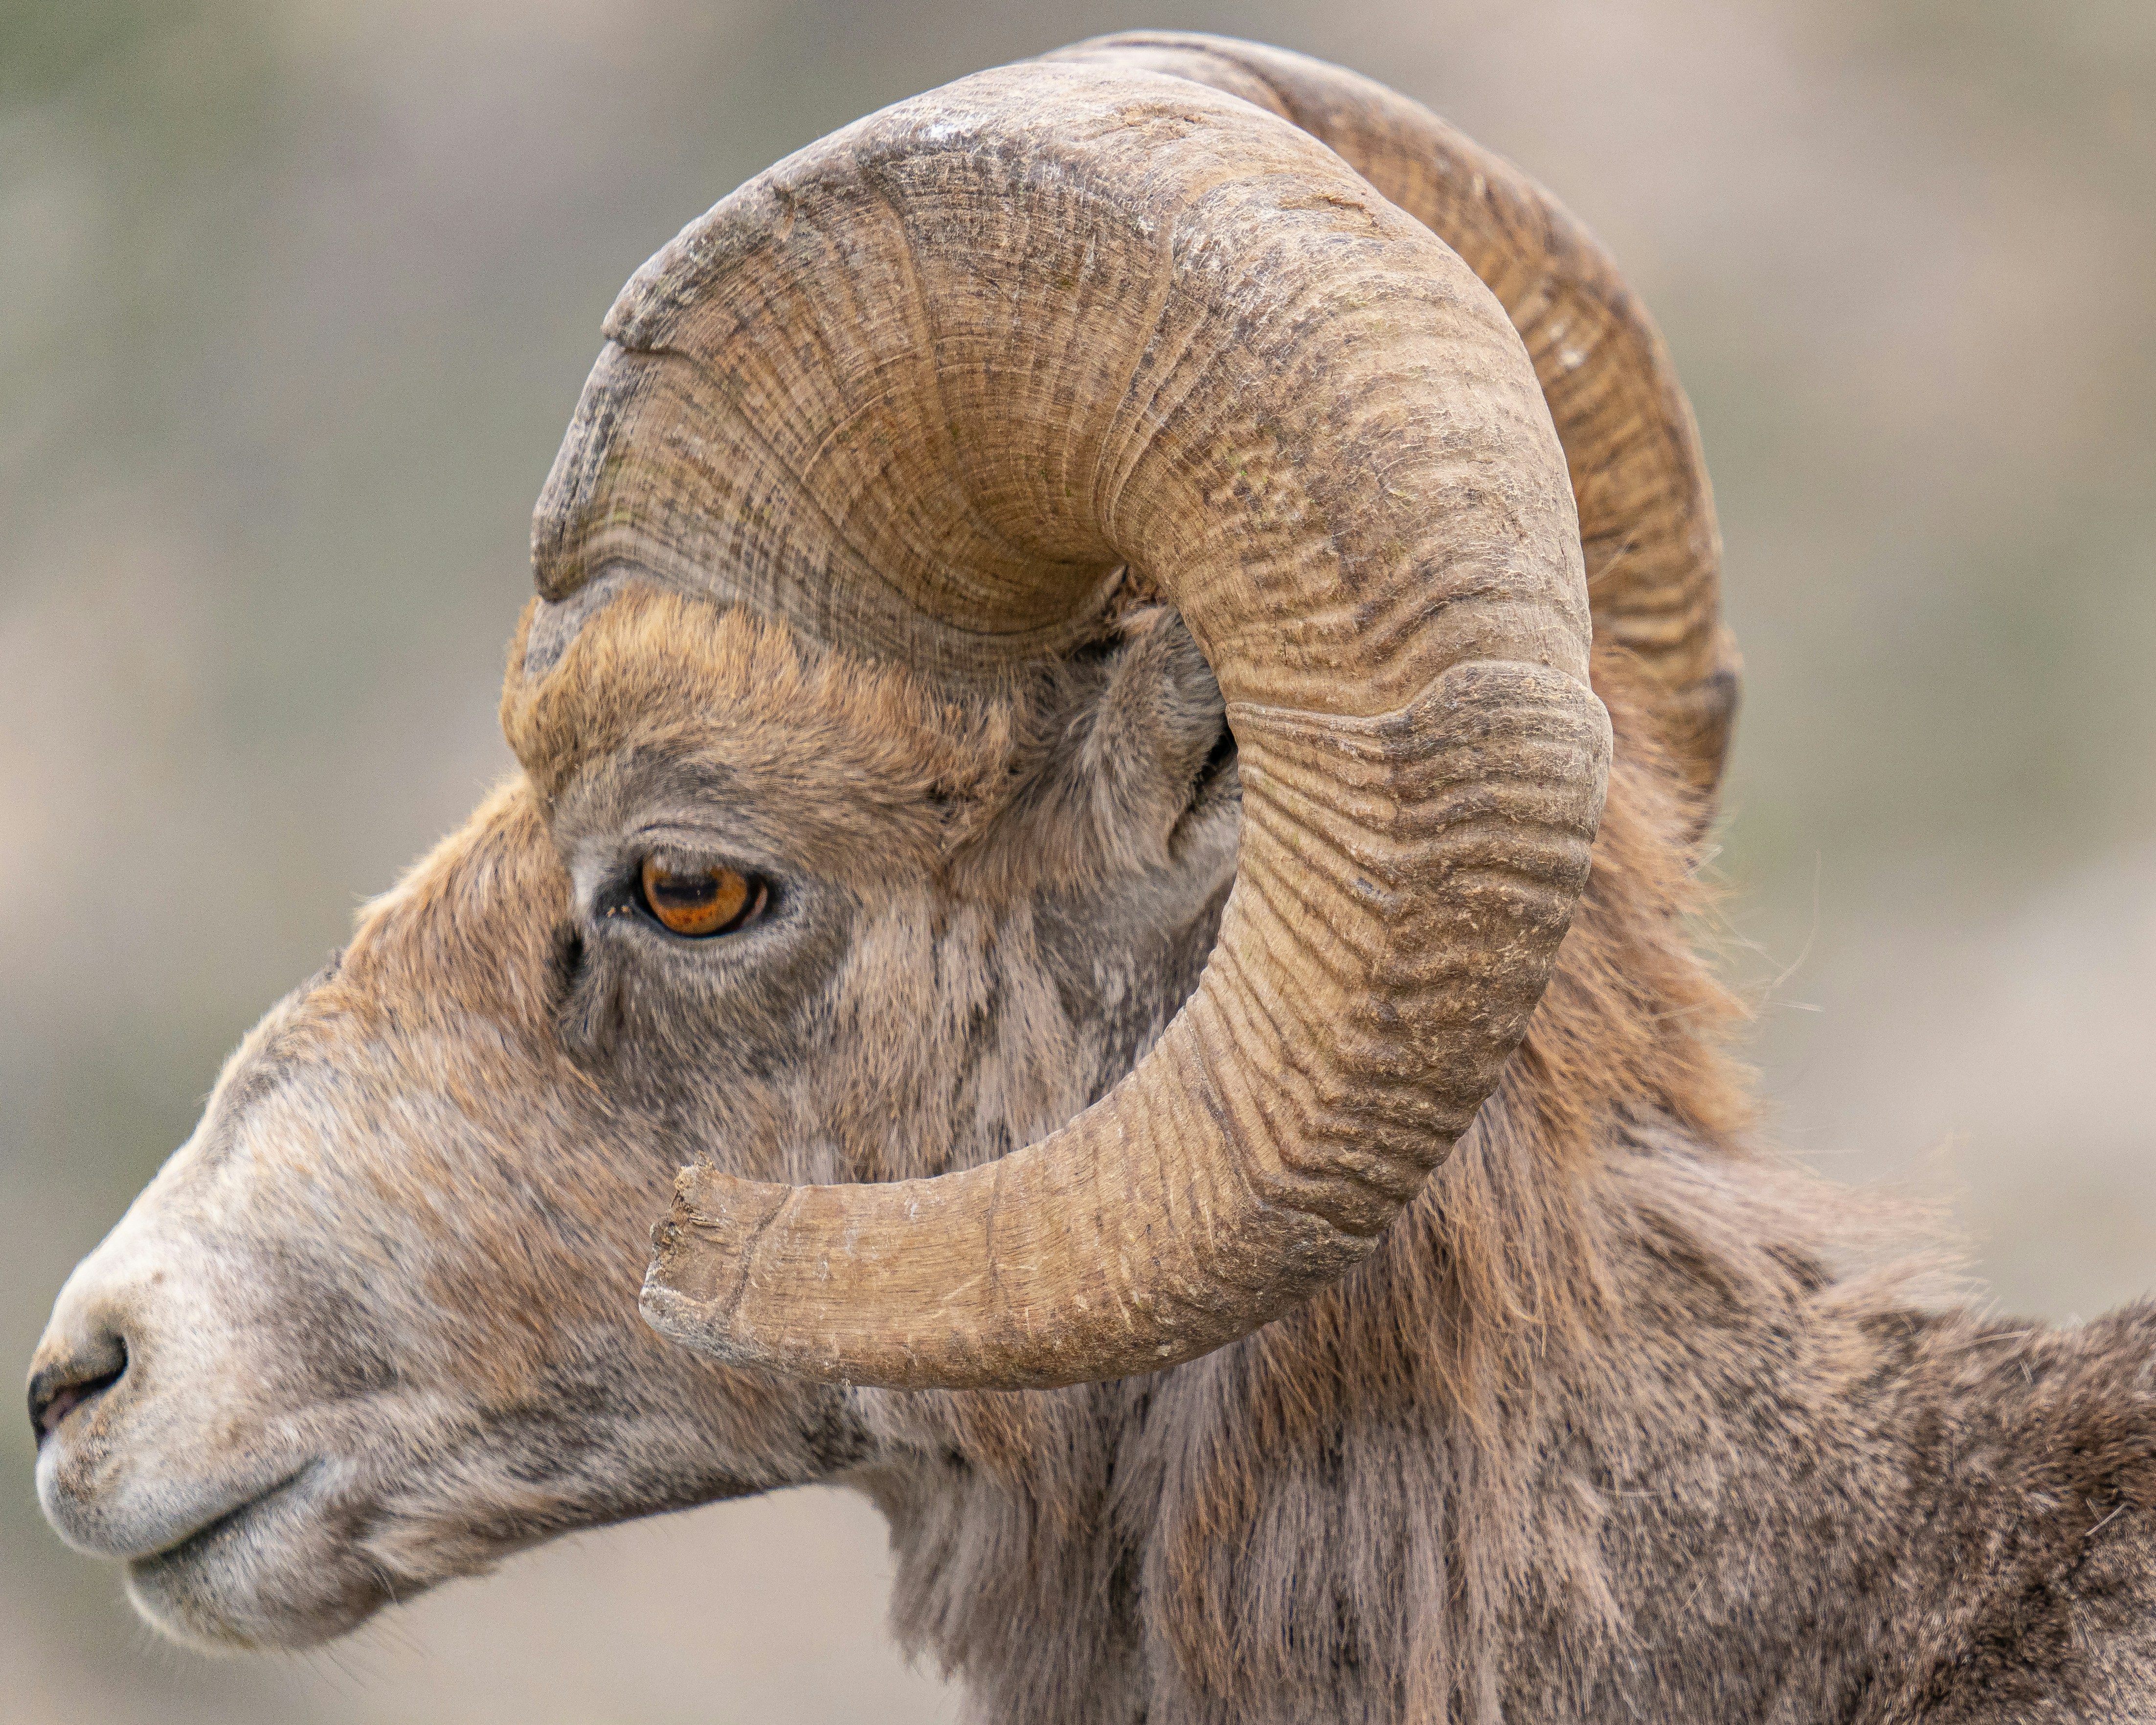 The portrait of a giant-horn goat.